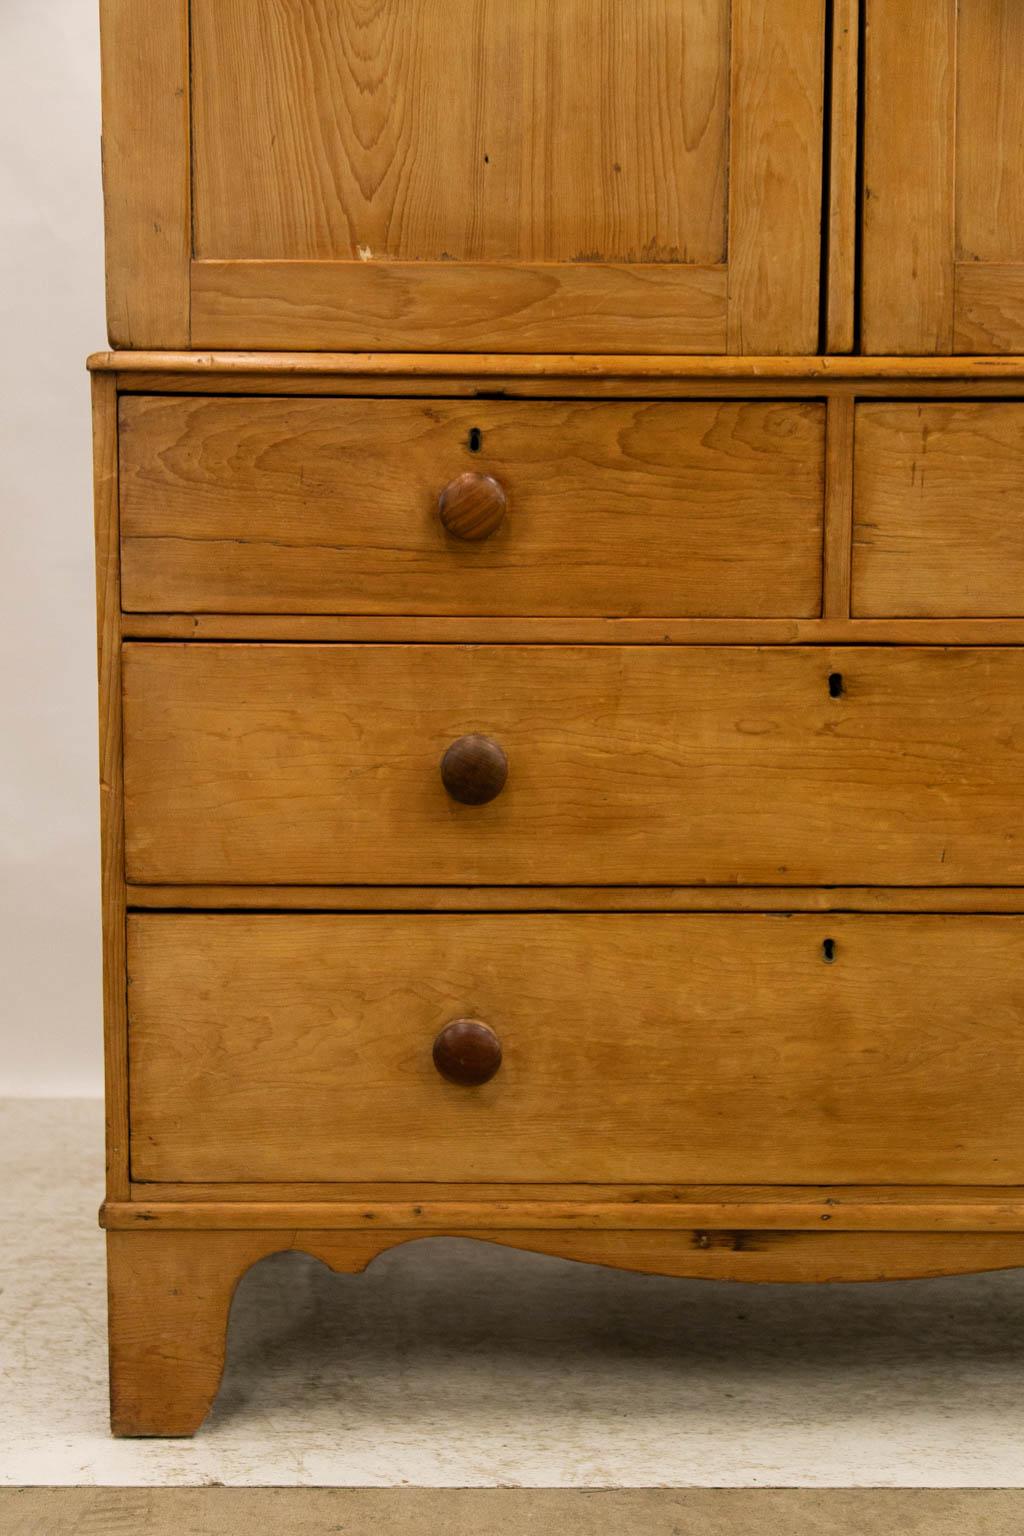 The top of this linen press has recessed panel doors which open to expose two fixed shelves in either side. The drawers have original locks and knobs. There are some shrinkage cracks on the sides.